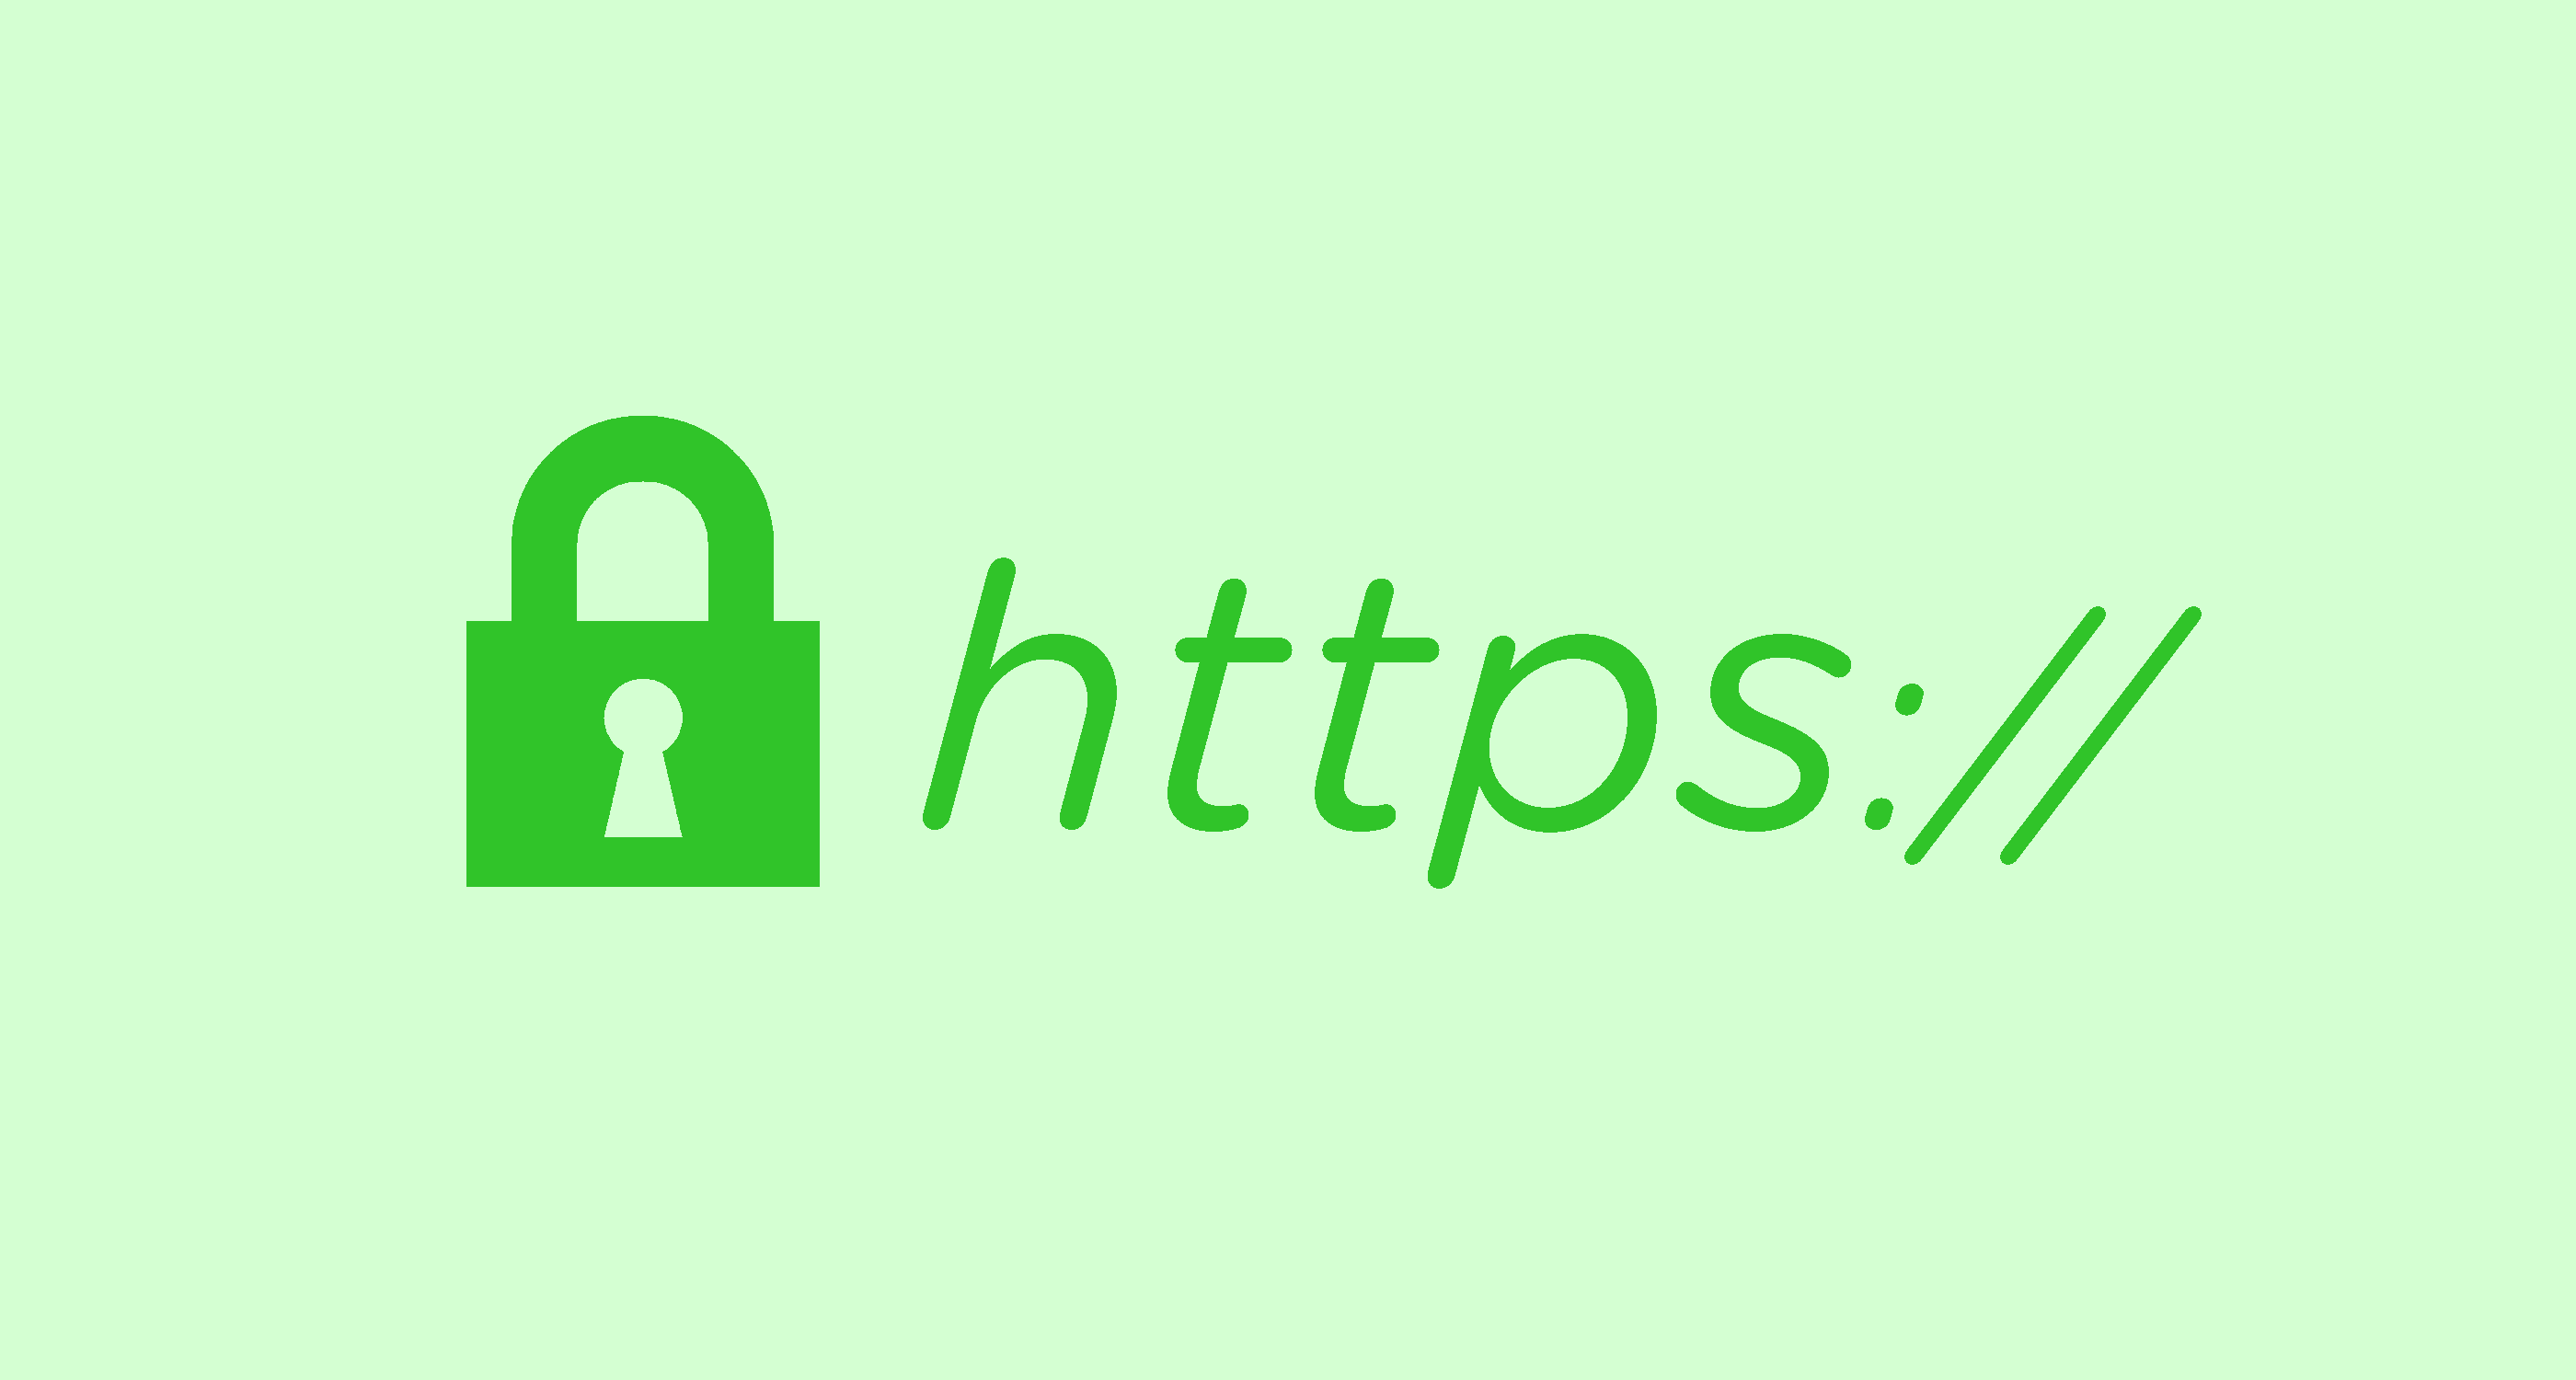 All things HTTP/2 and HTTPS — Draft podcast